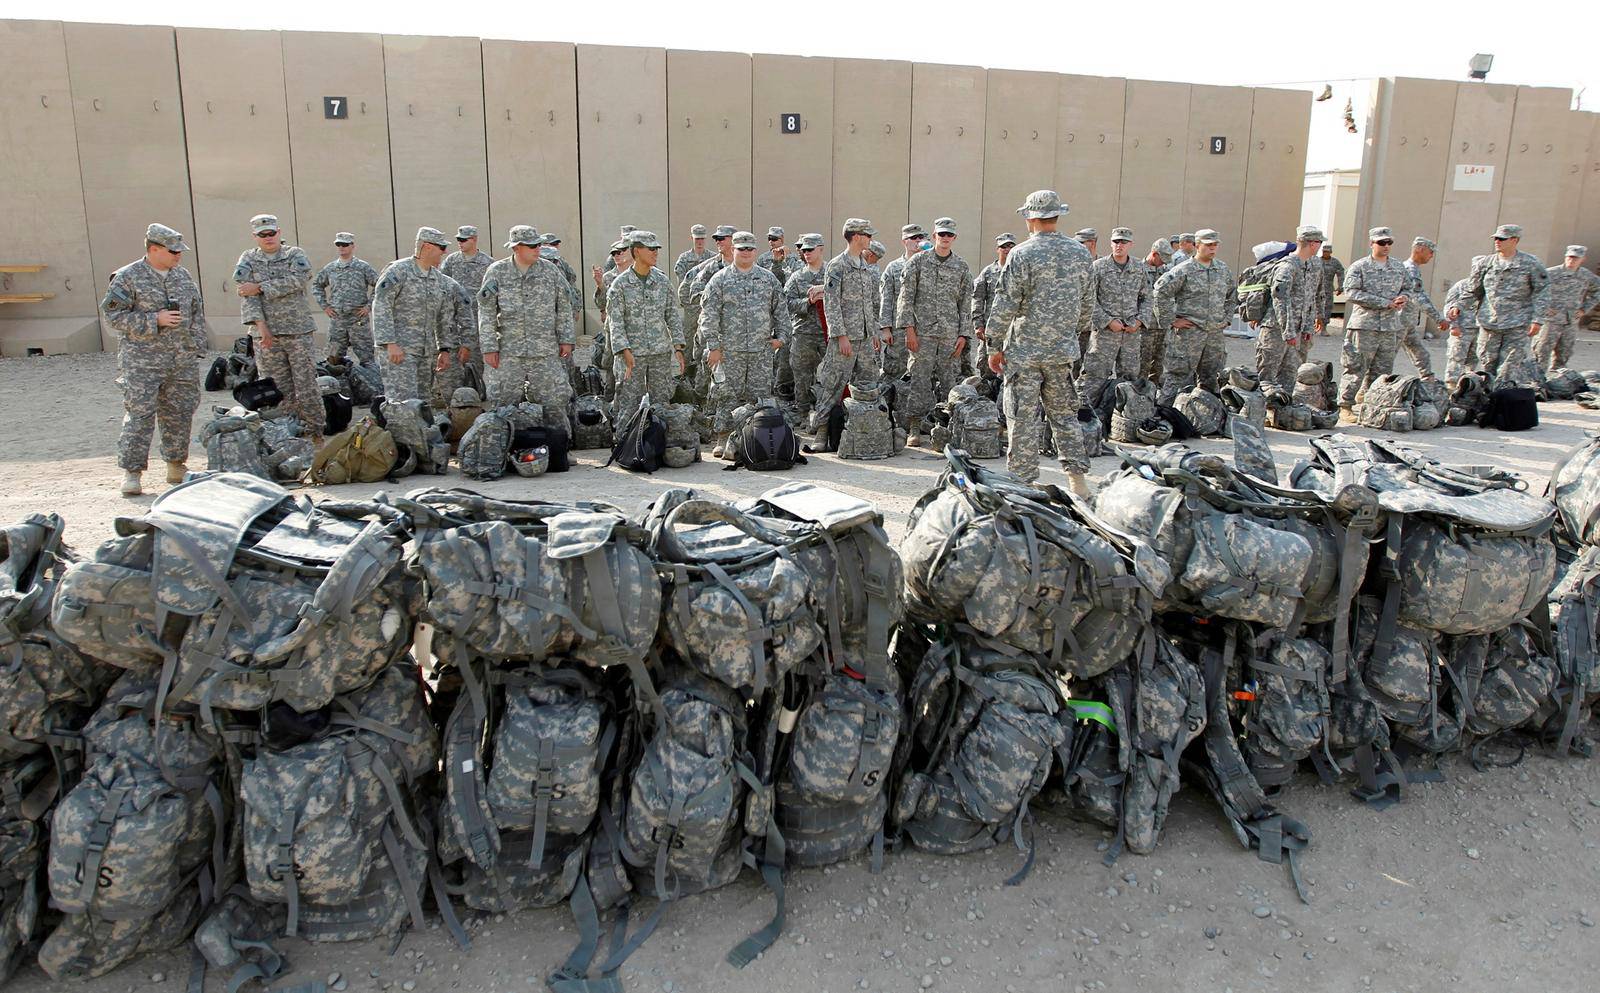 FILE PHOTO: U.S. soldiers of the 1st Battalion, 116th Infantry Regiment, wait to load their luggage as they prepare to pull out from Iraq and leave for Kuwait from Tallil Air Base near Nassiriya